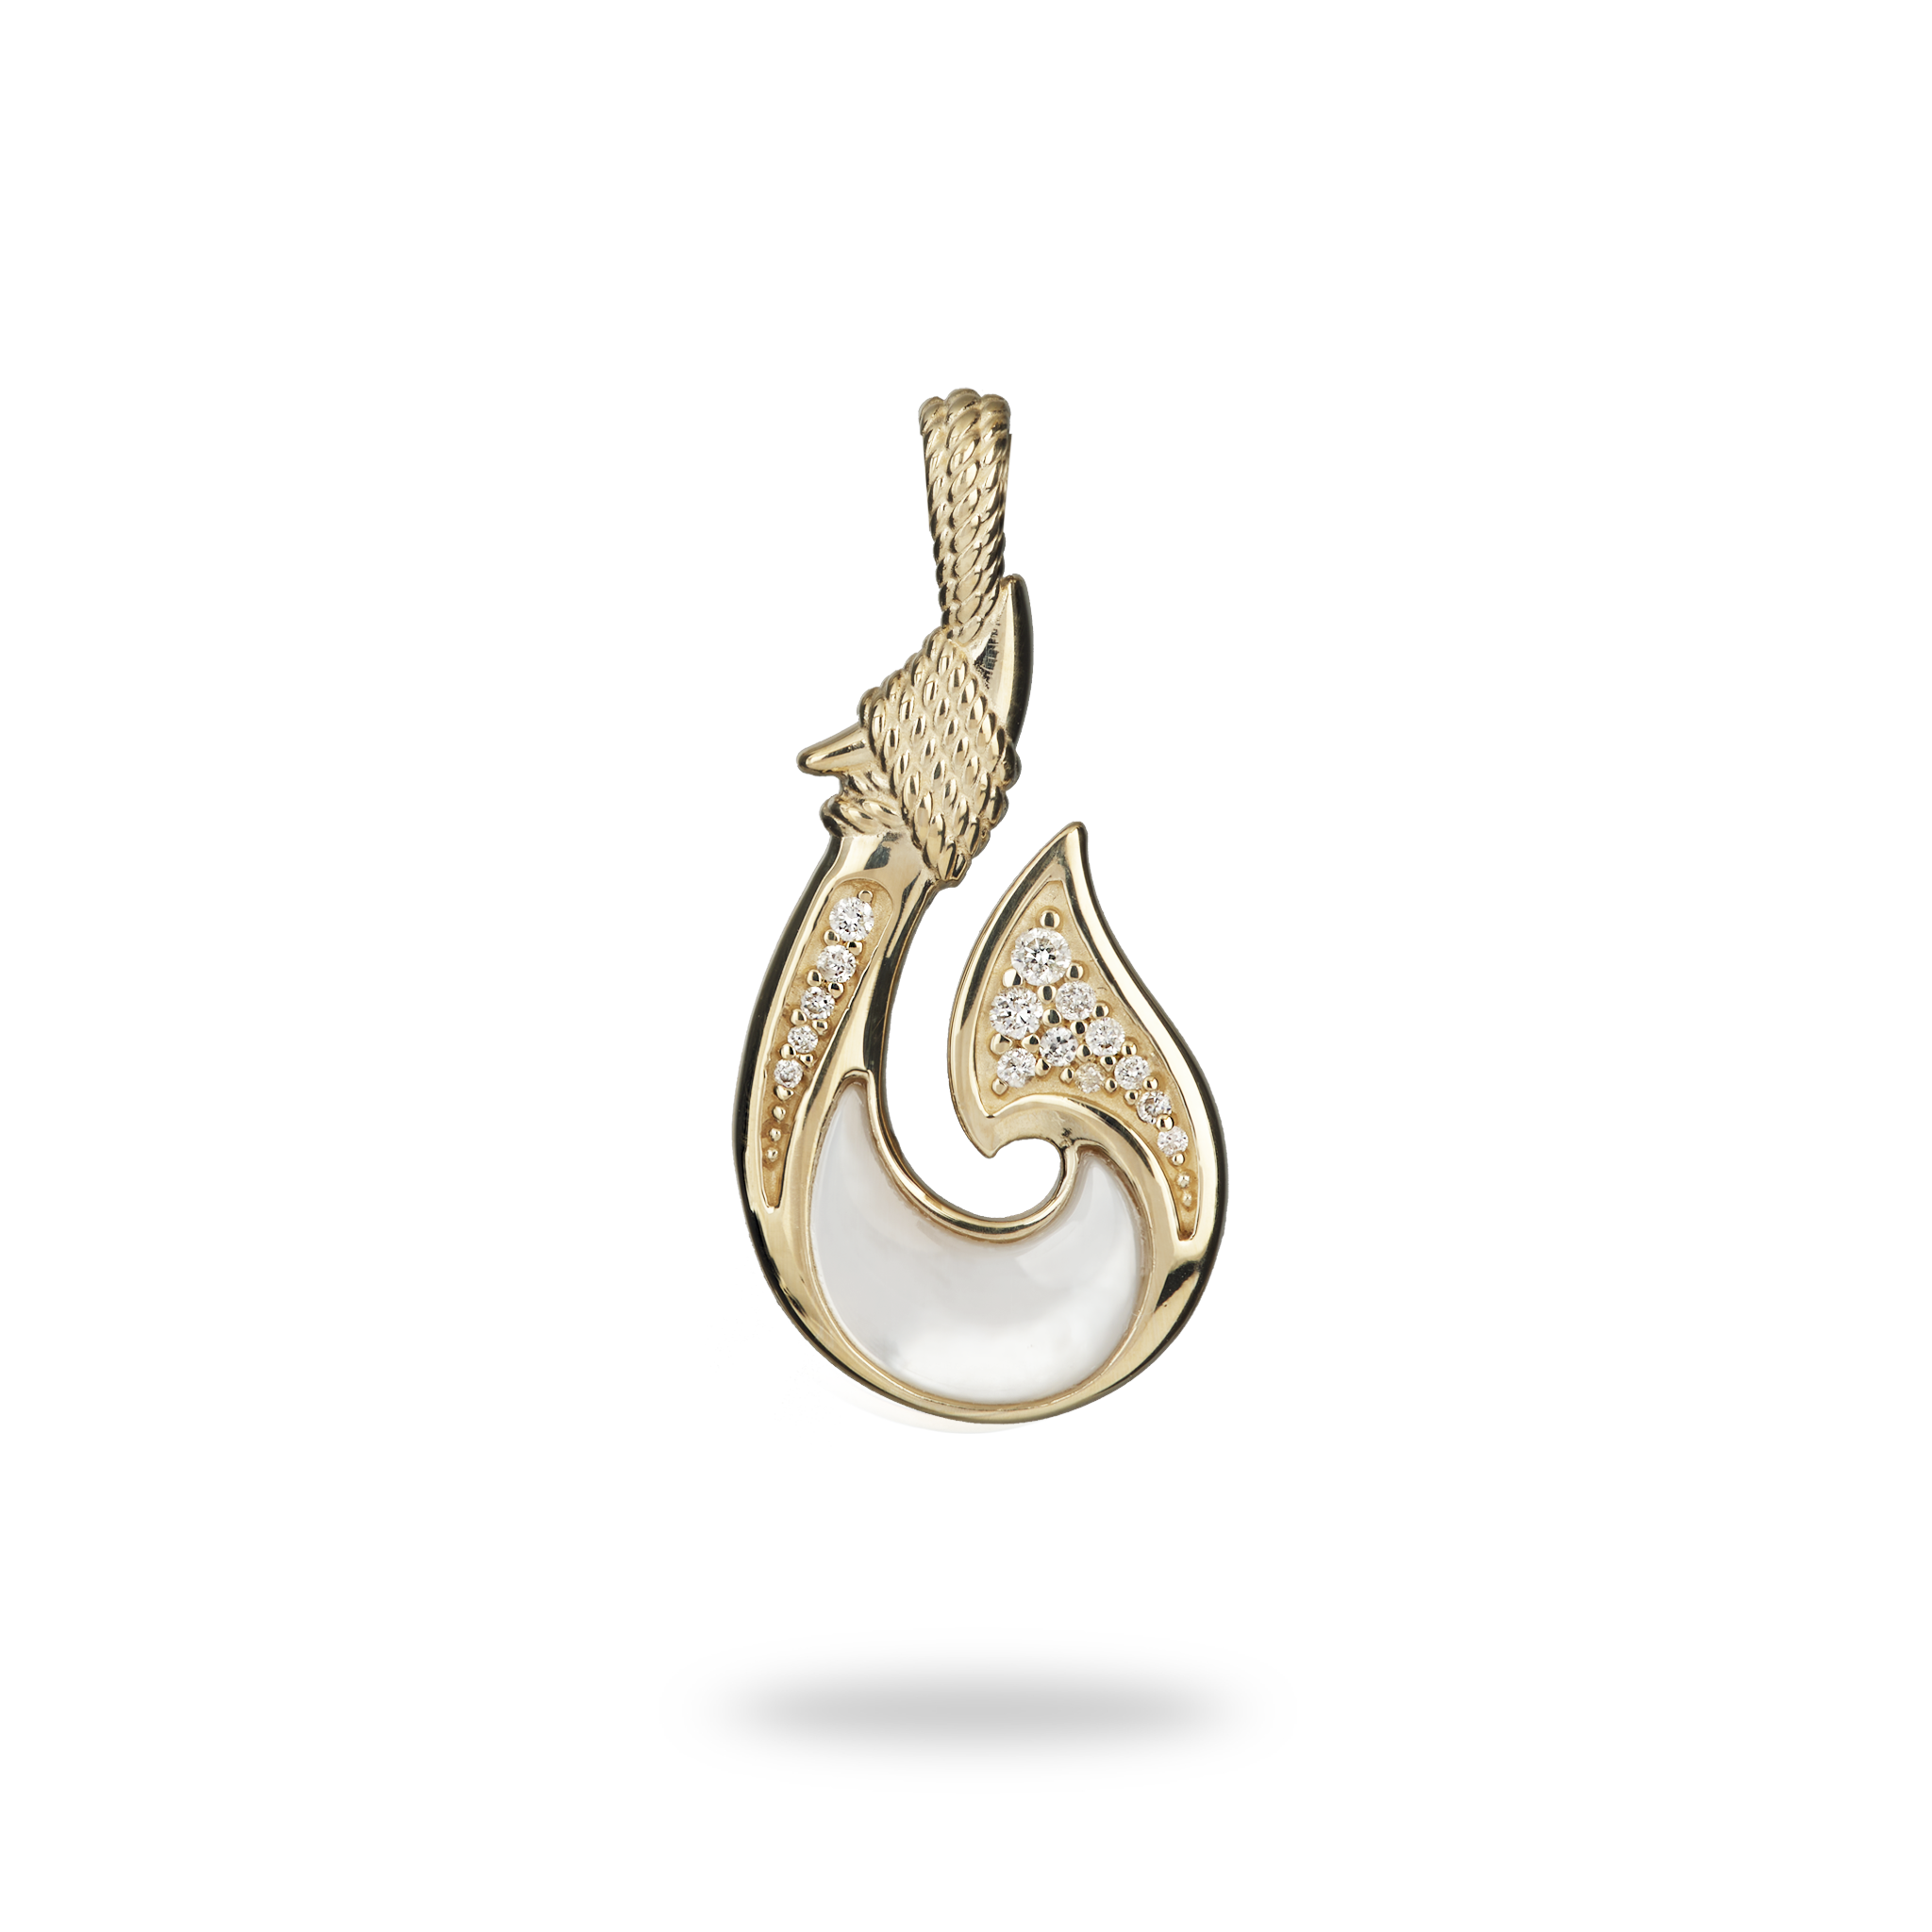 Fish Hook Mother of Pearl Pendant in Gold with Diamonds - 27mm